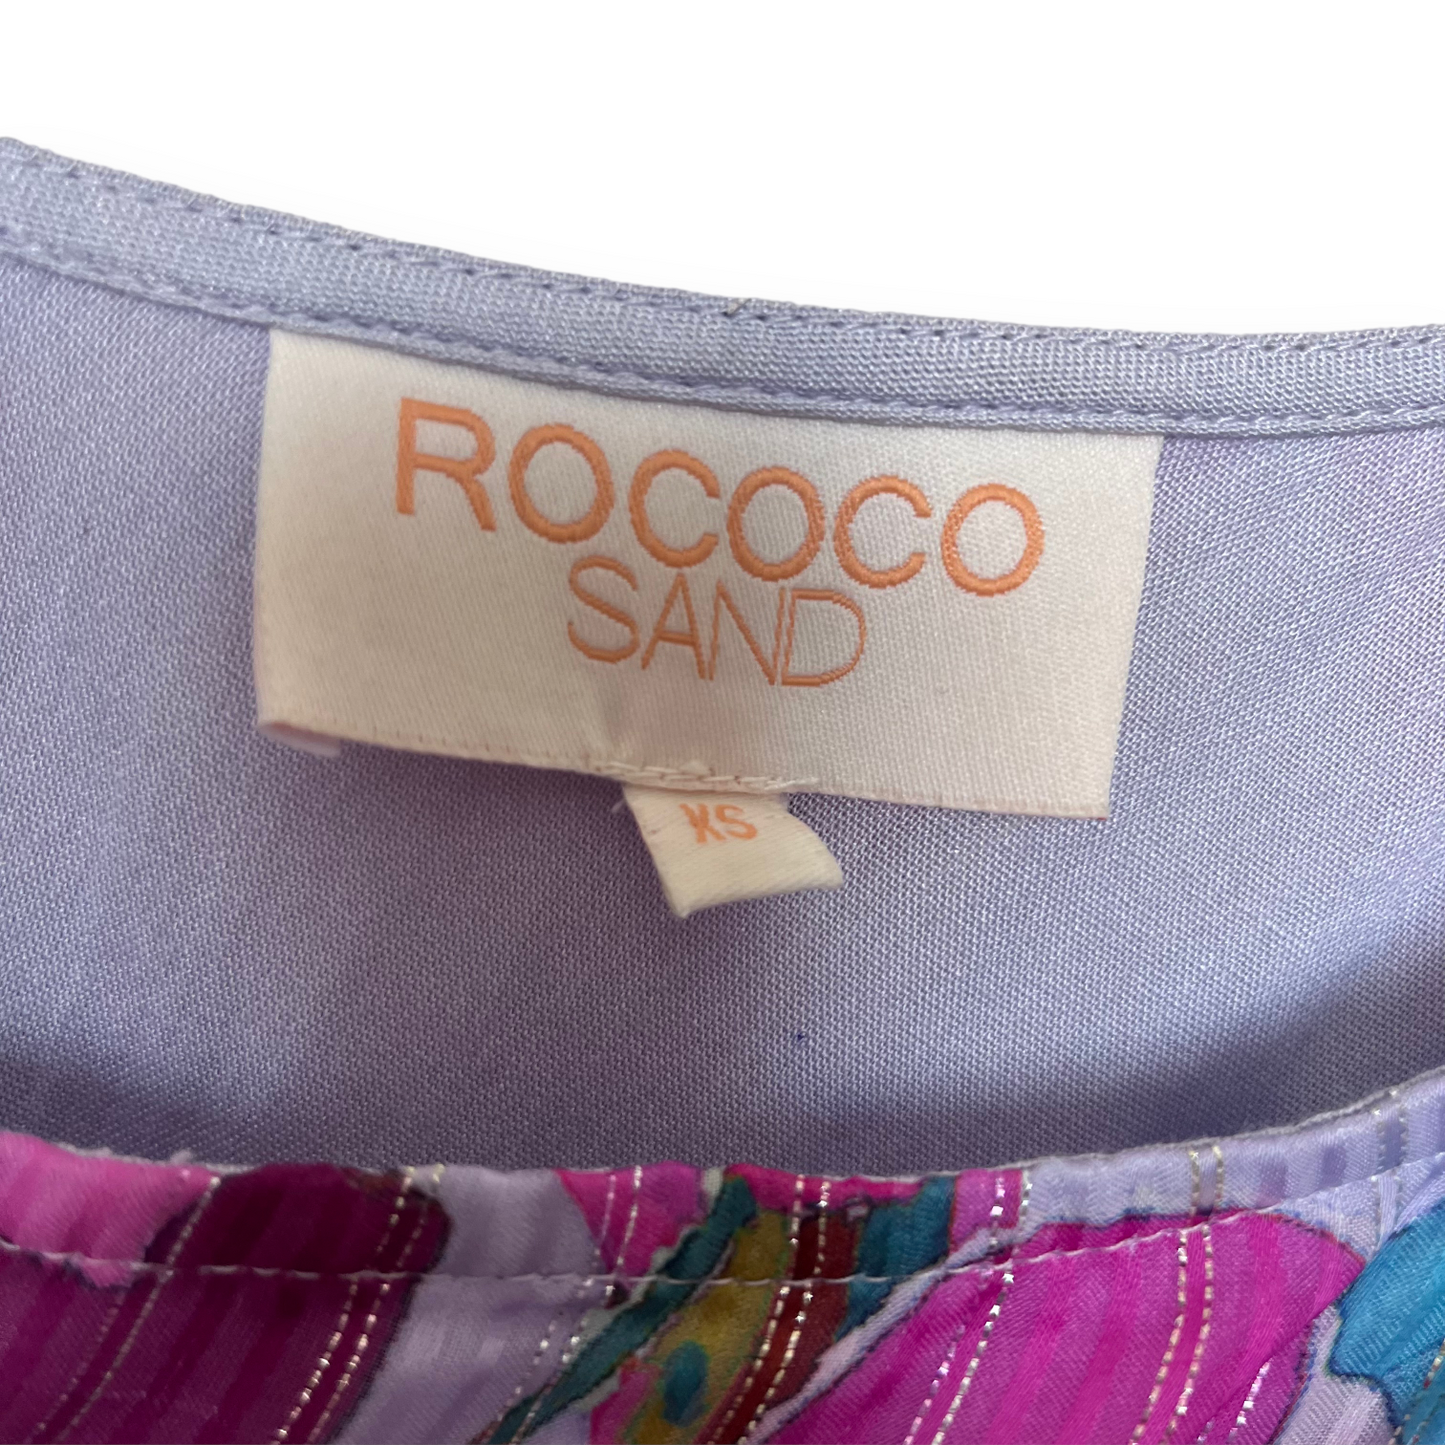 ROCOCO SAND Long Dress in Lilac